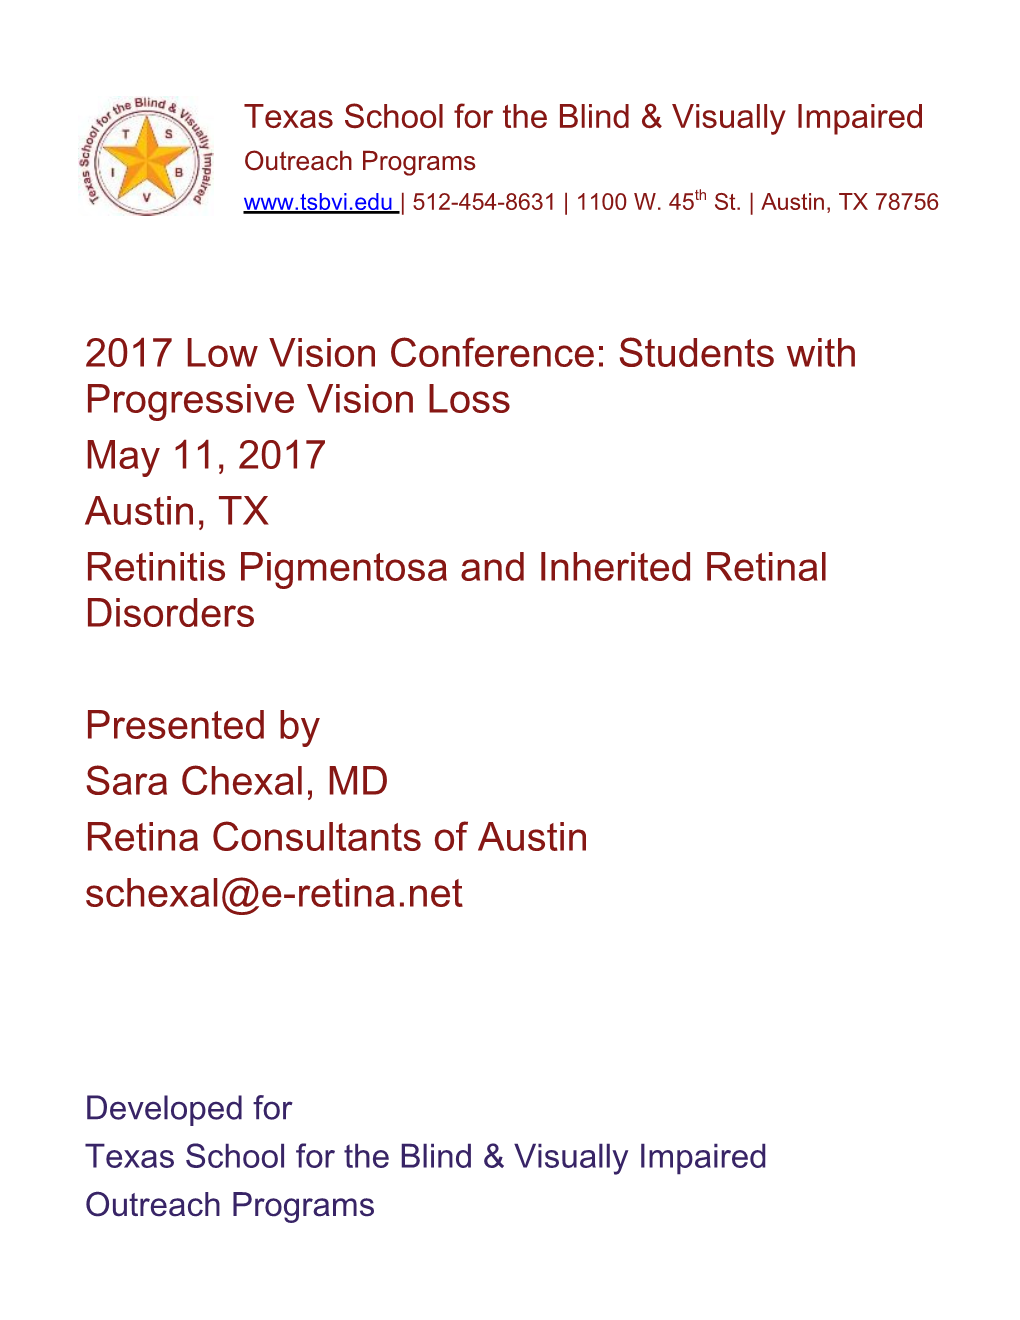 2017 Low Vision Conference: Students with Progressive Vision Loss